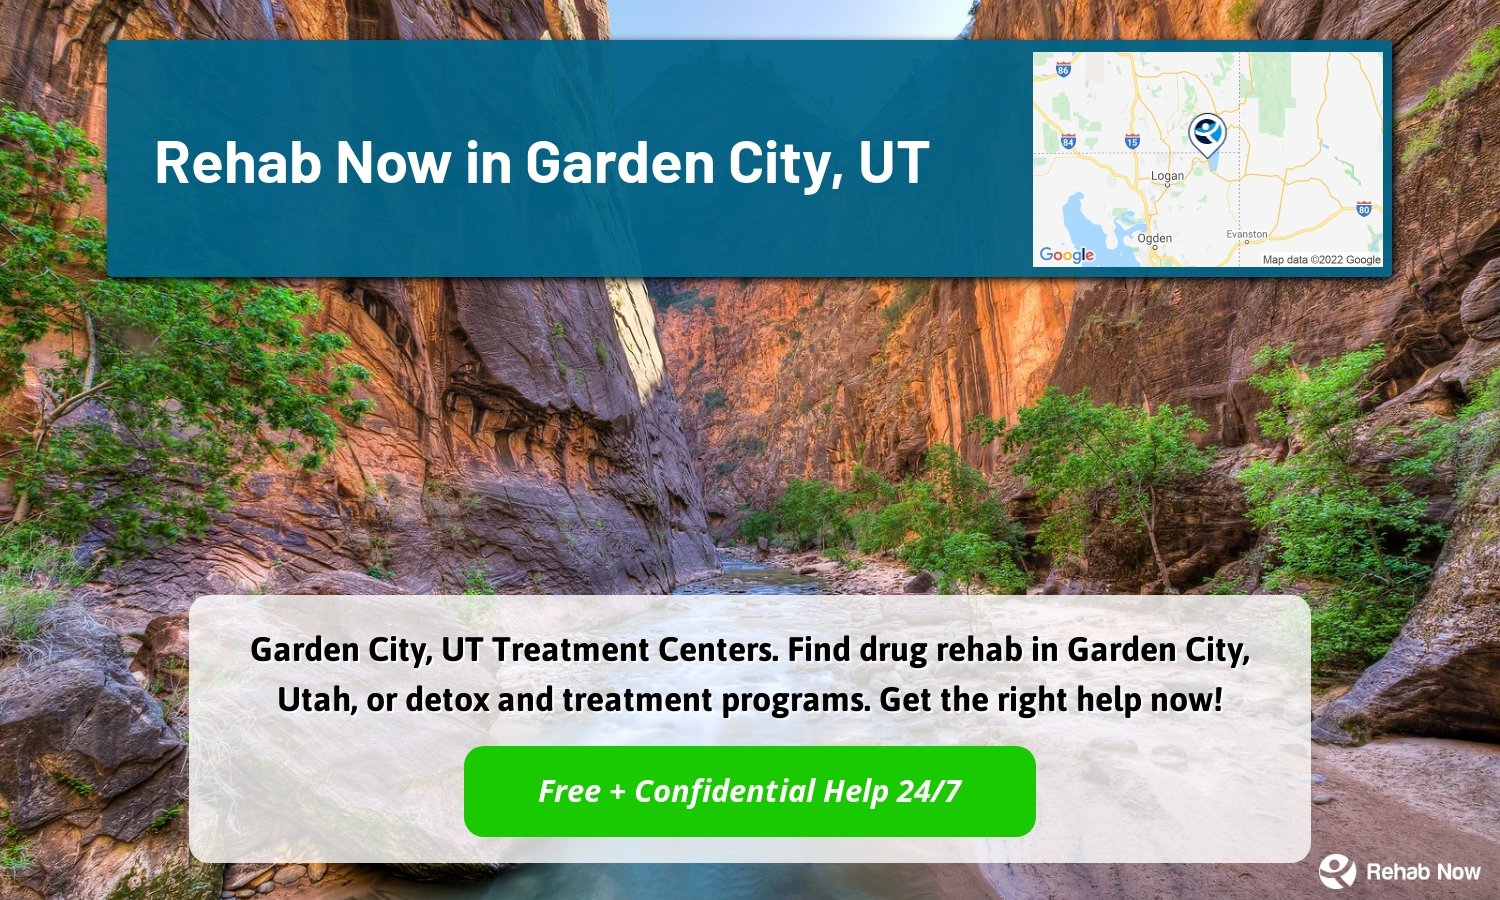 Garden City, UT Treatment Centers. Find drug rehab in Garden City, Utah, or detox and treatment programs. Get the right help now!